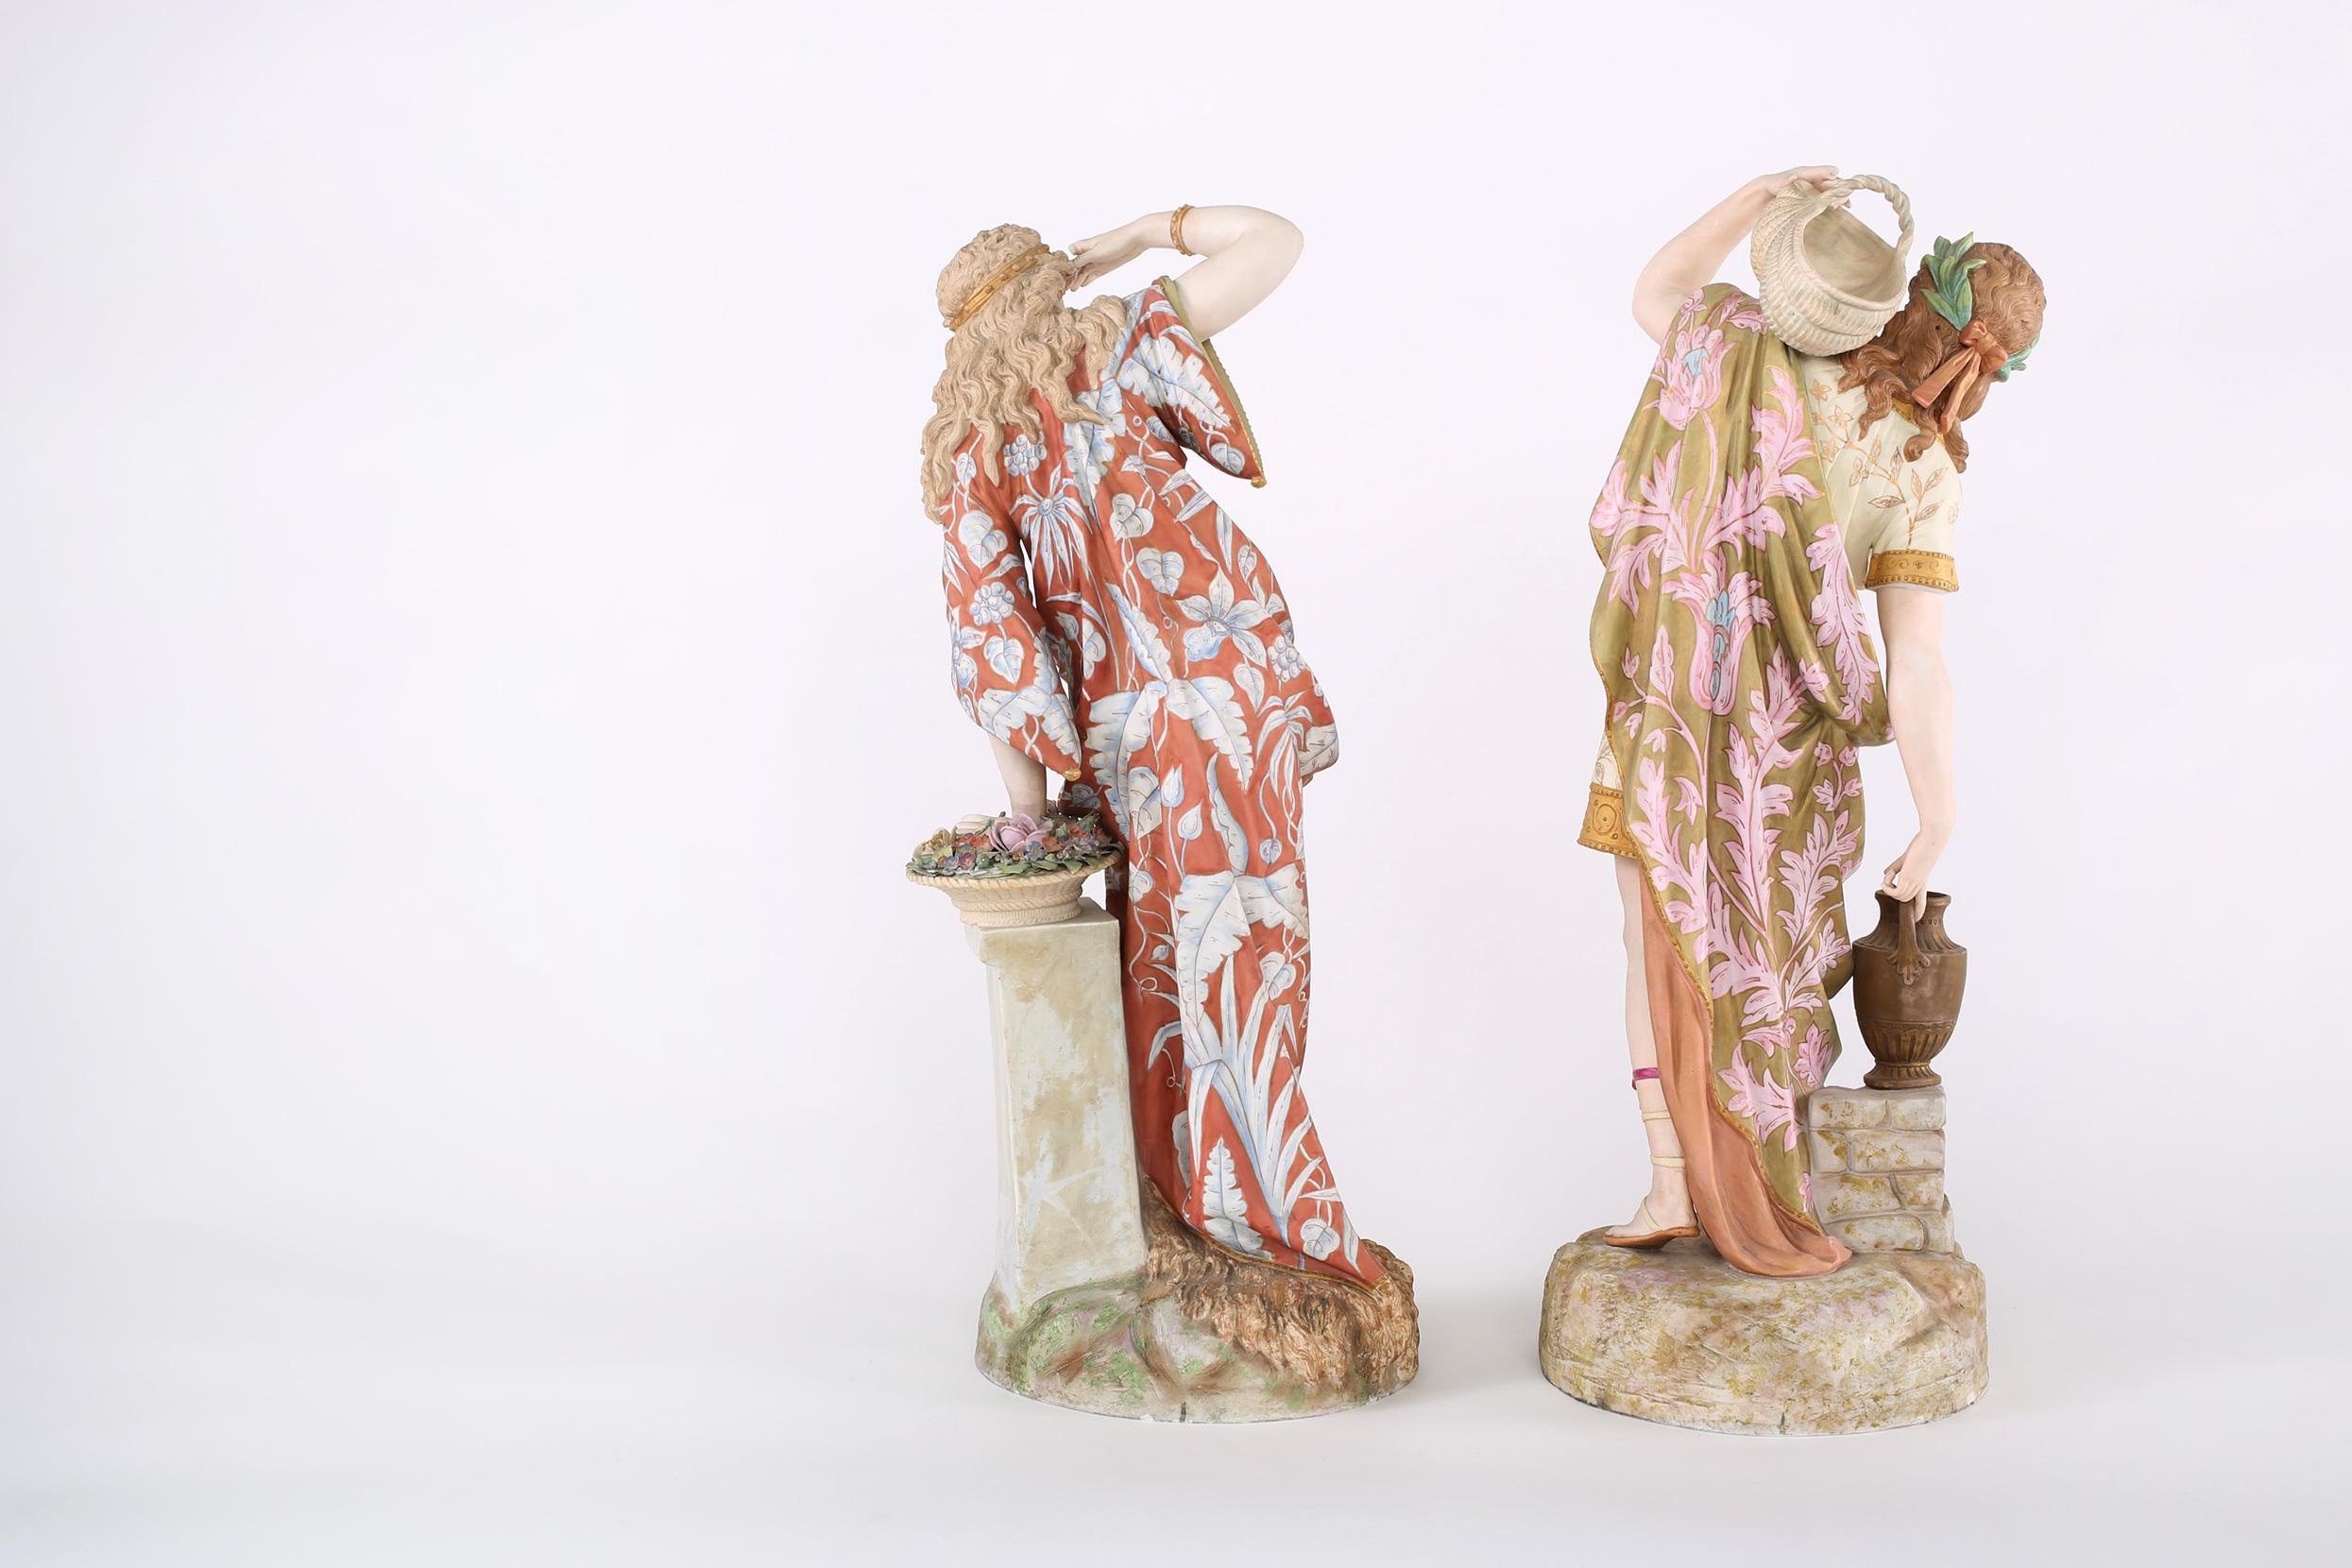 French pair of large and impressively decorated porcelain centerpiece figures. Each one is in great antique condition with appropriate wear consistent with age / use. Both Repaired on the base. Each decorative piece is about 24.5 inches high x 9